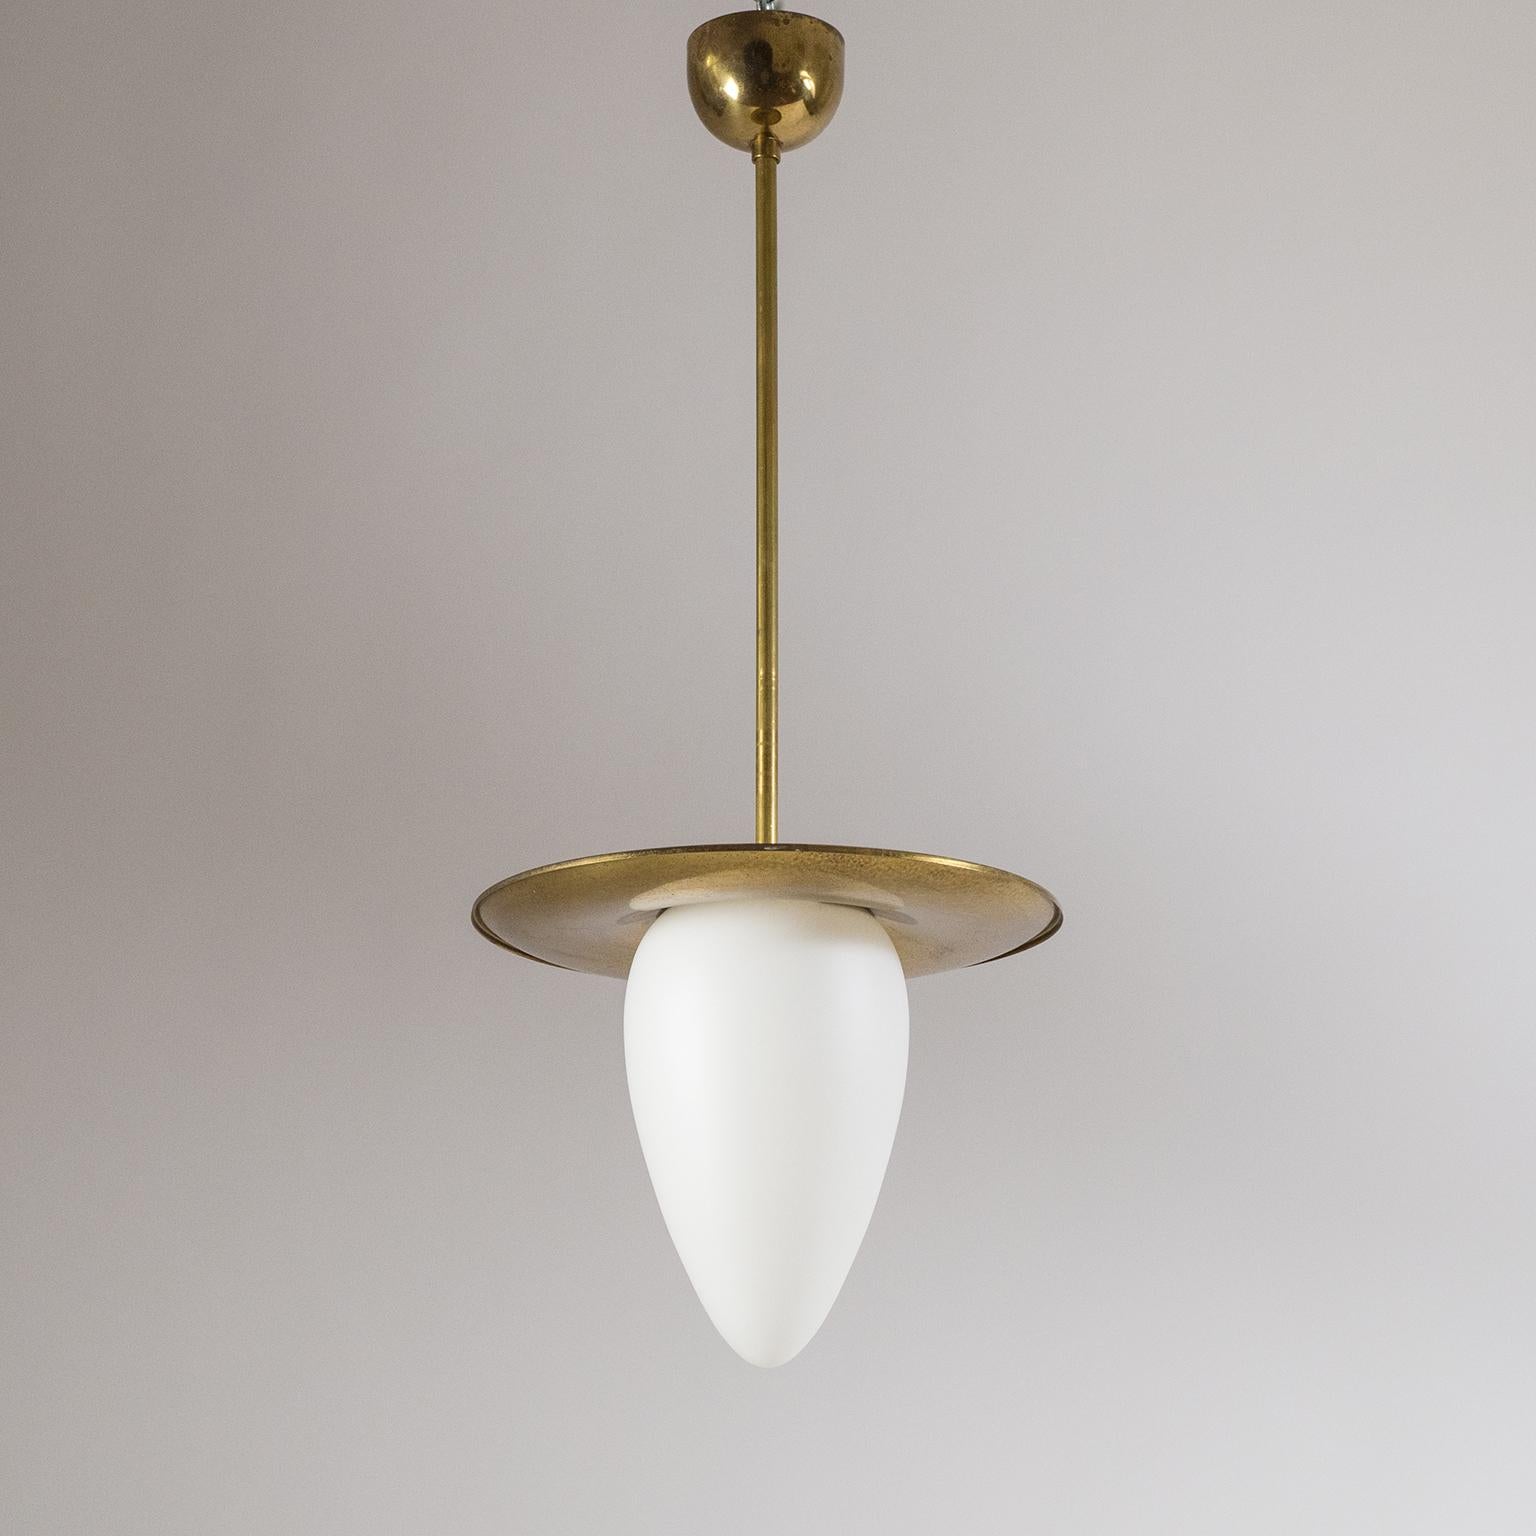 Very fine brass and satin glass pendant from the 1930s. An elongated glass diffuser with satin finish fits snugly underneath a curved brass shade. The Minimalist approach of this fixture already reflects the modernist ideas of post-war modernism.